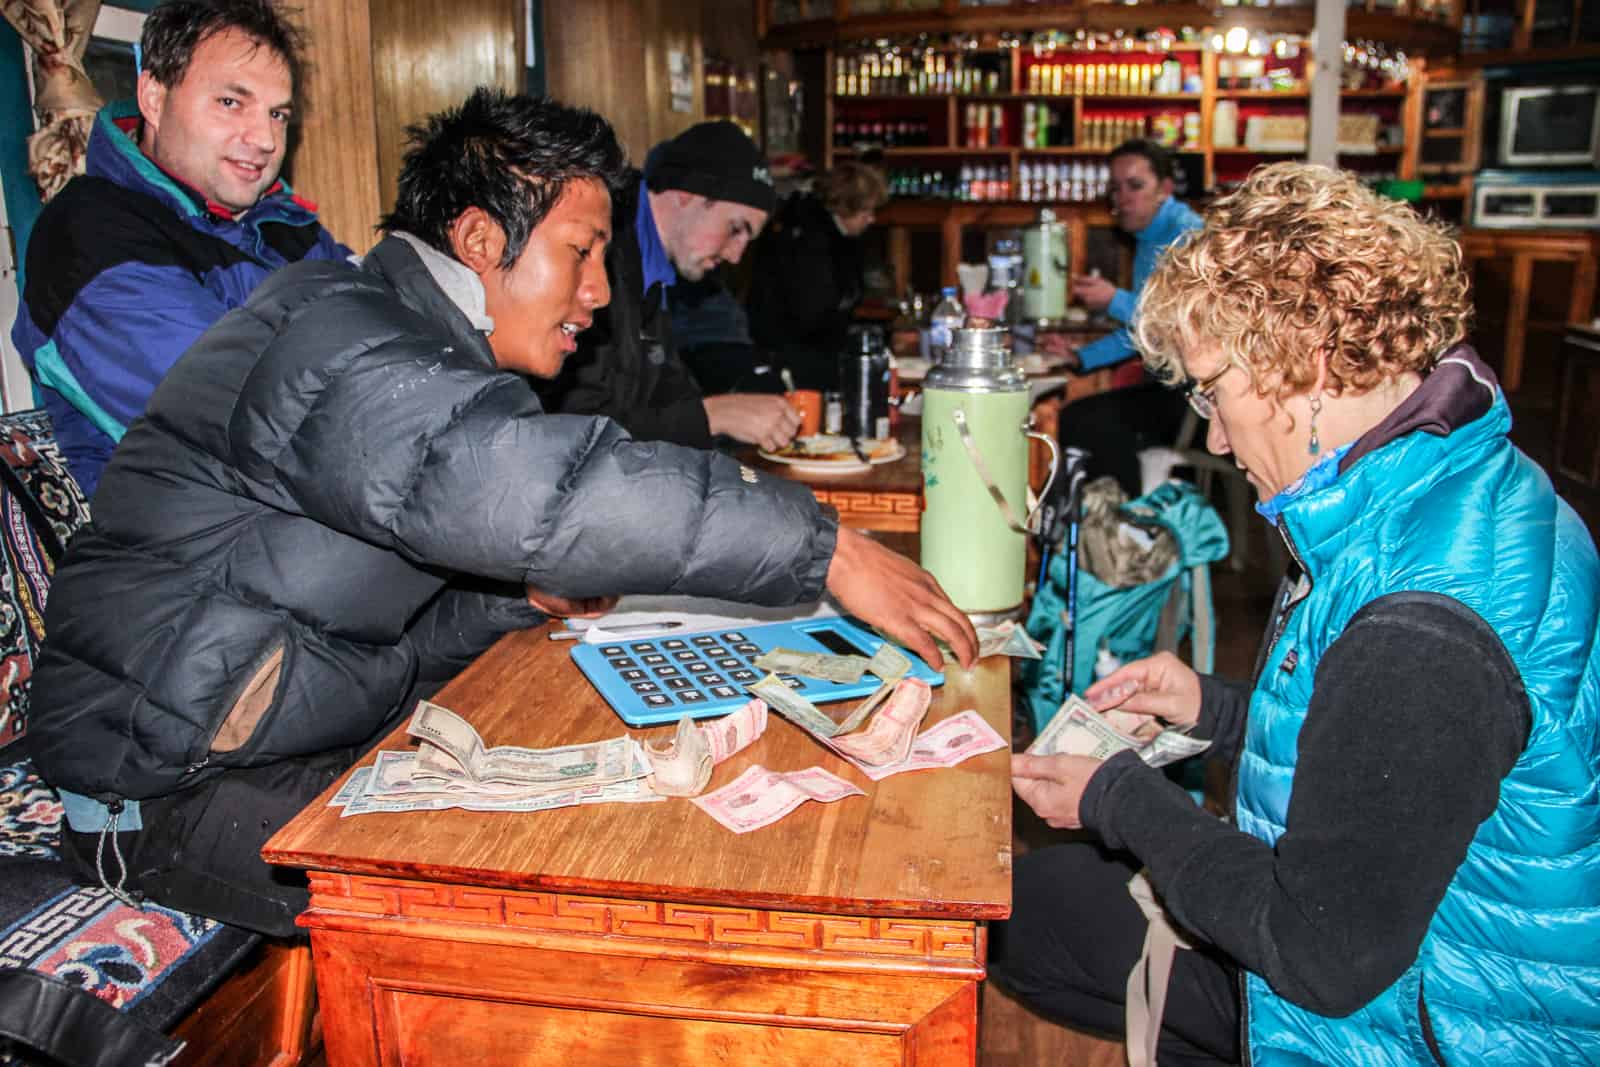 A Nepalese porter exchanges money with a female trekker on a wooden table in a traditional wooden teahouse on the EBC Trek